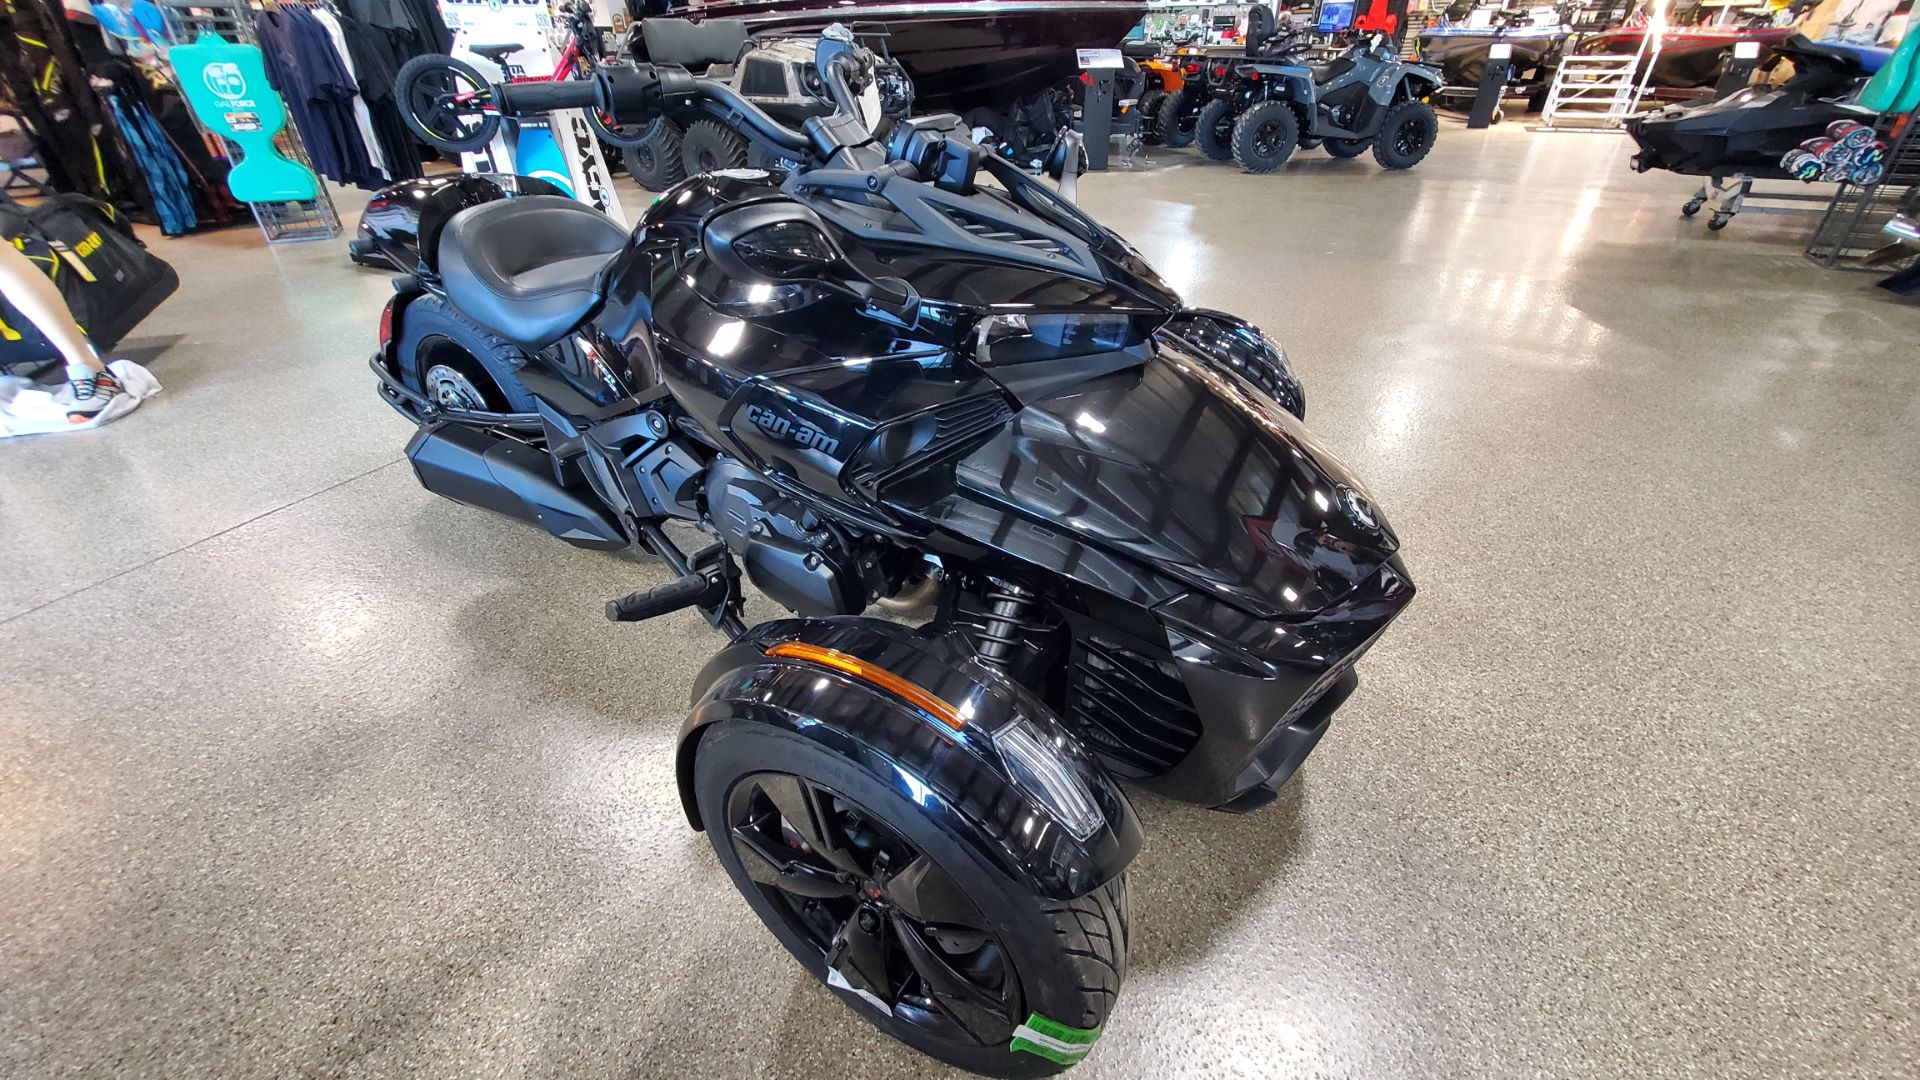 2022 Can-Am Spyder F3 in Roscoe, Illinois - Photo 3